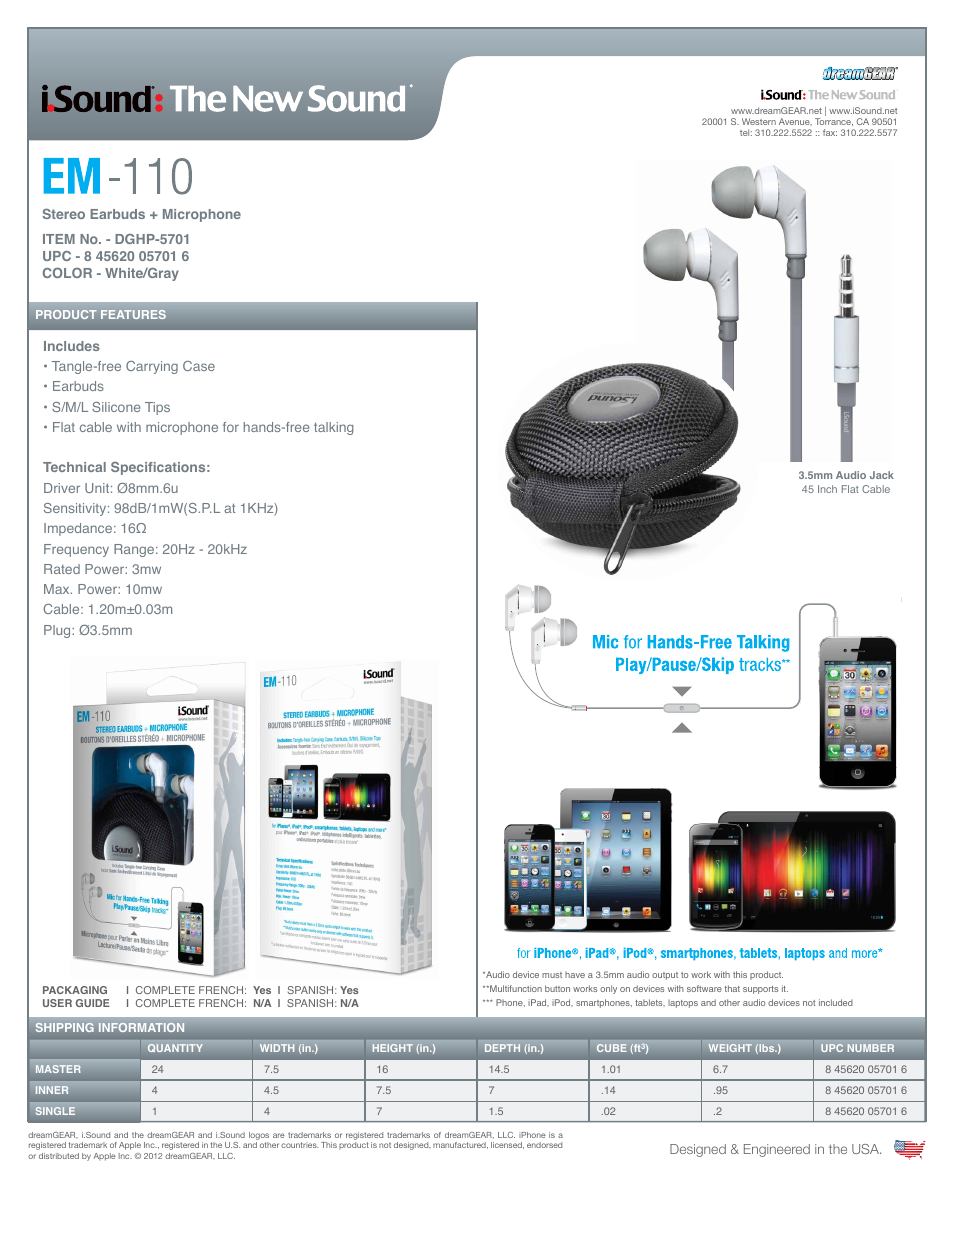 EM-110 Stereo Earbuds + Microphone - Sell Sheet